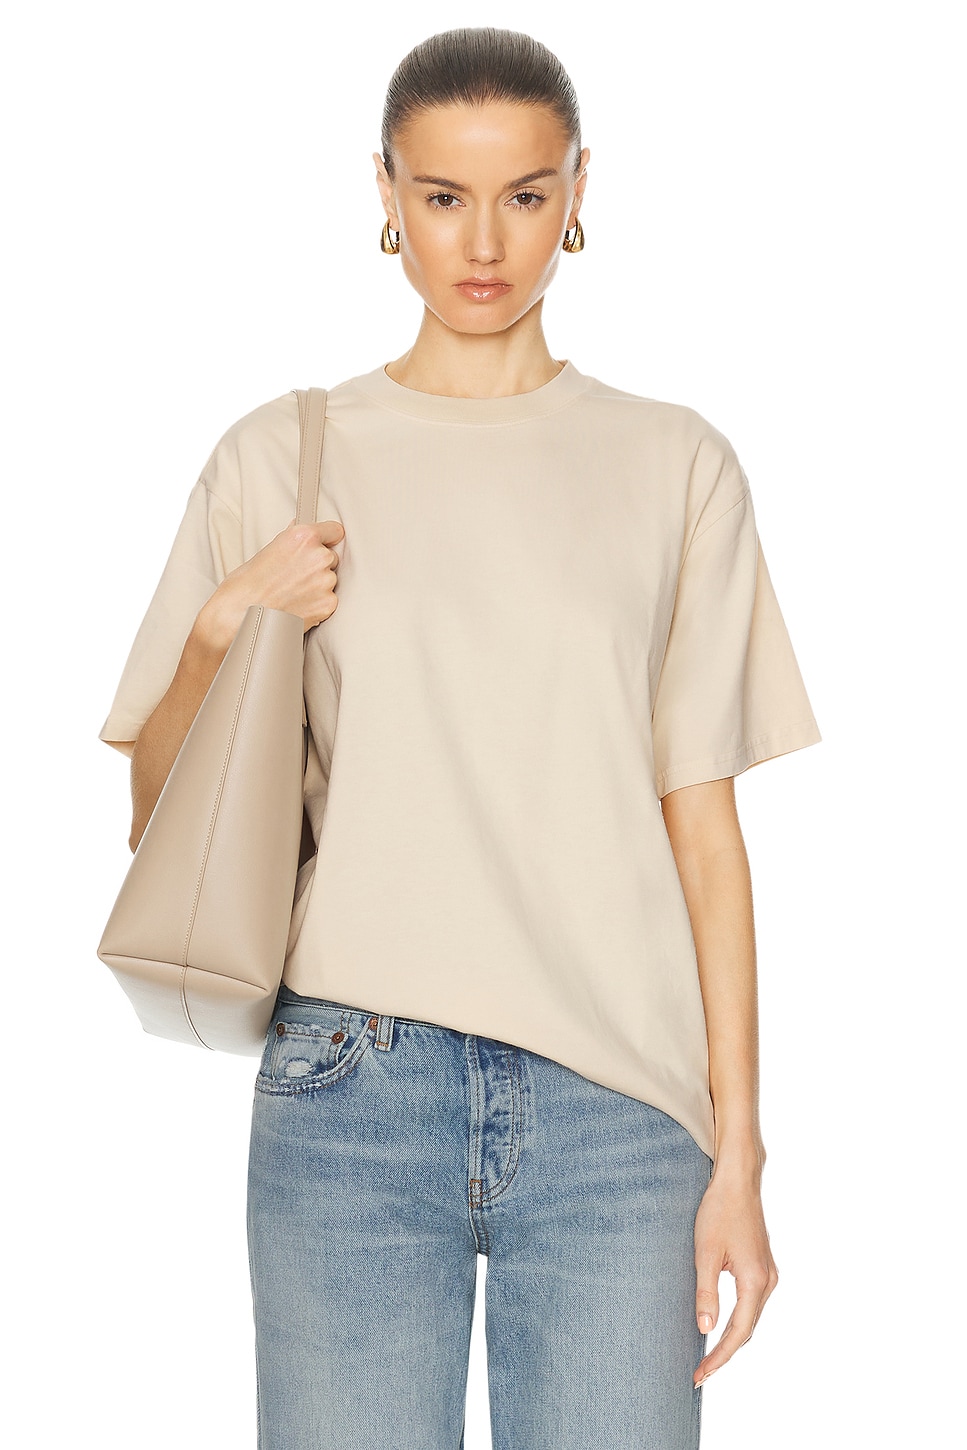 The Relaxed Tee in Neutral